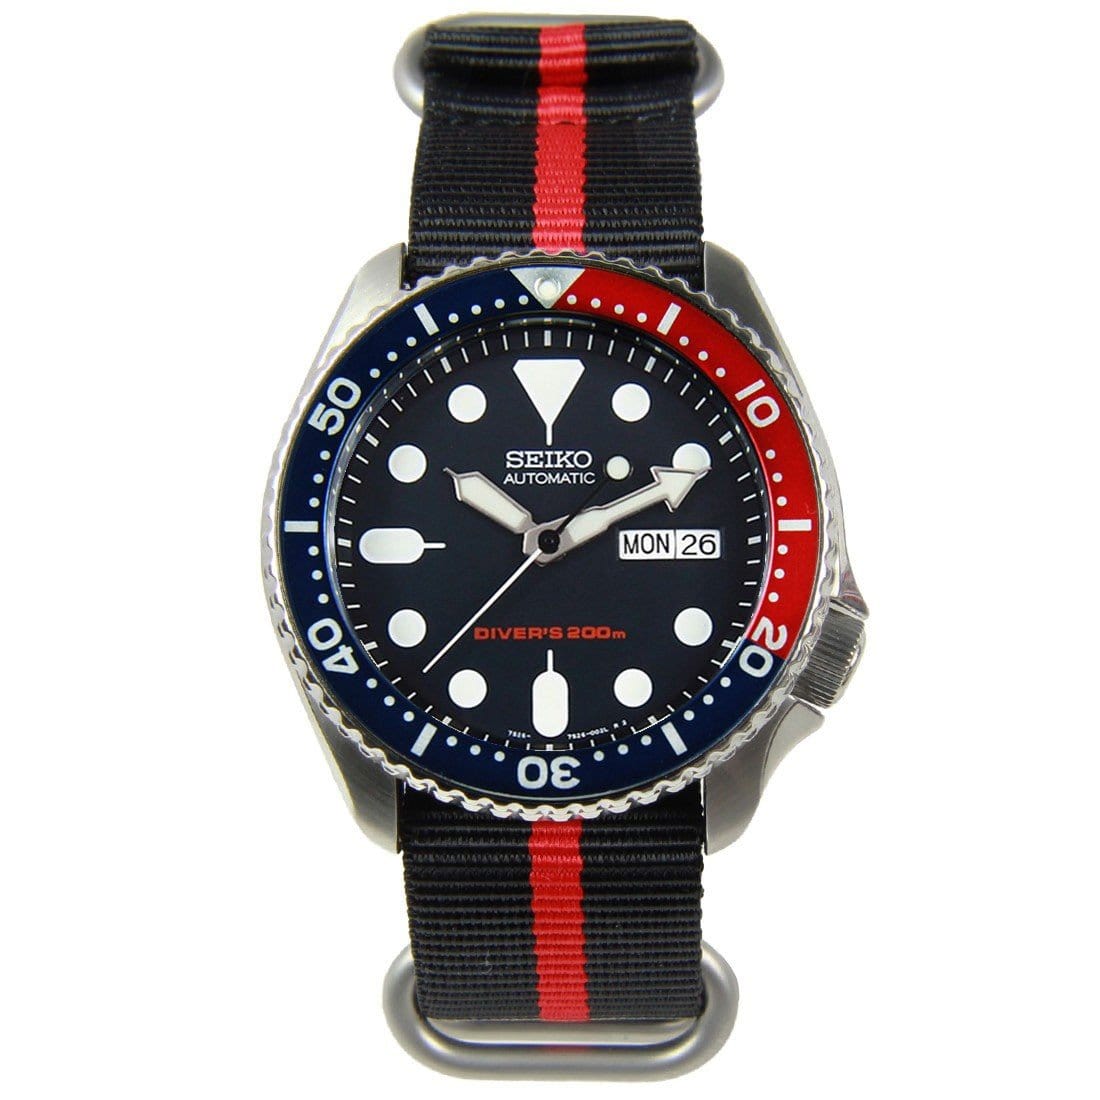 SKX009K1 SKX009 Seiko Automatic Analog Mens Dive Watch with Extra Strap